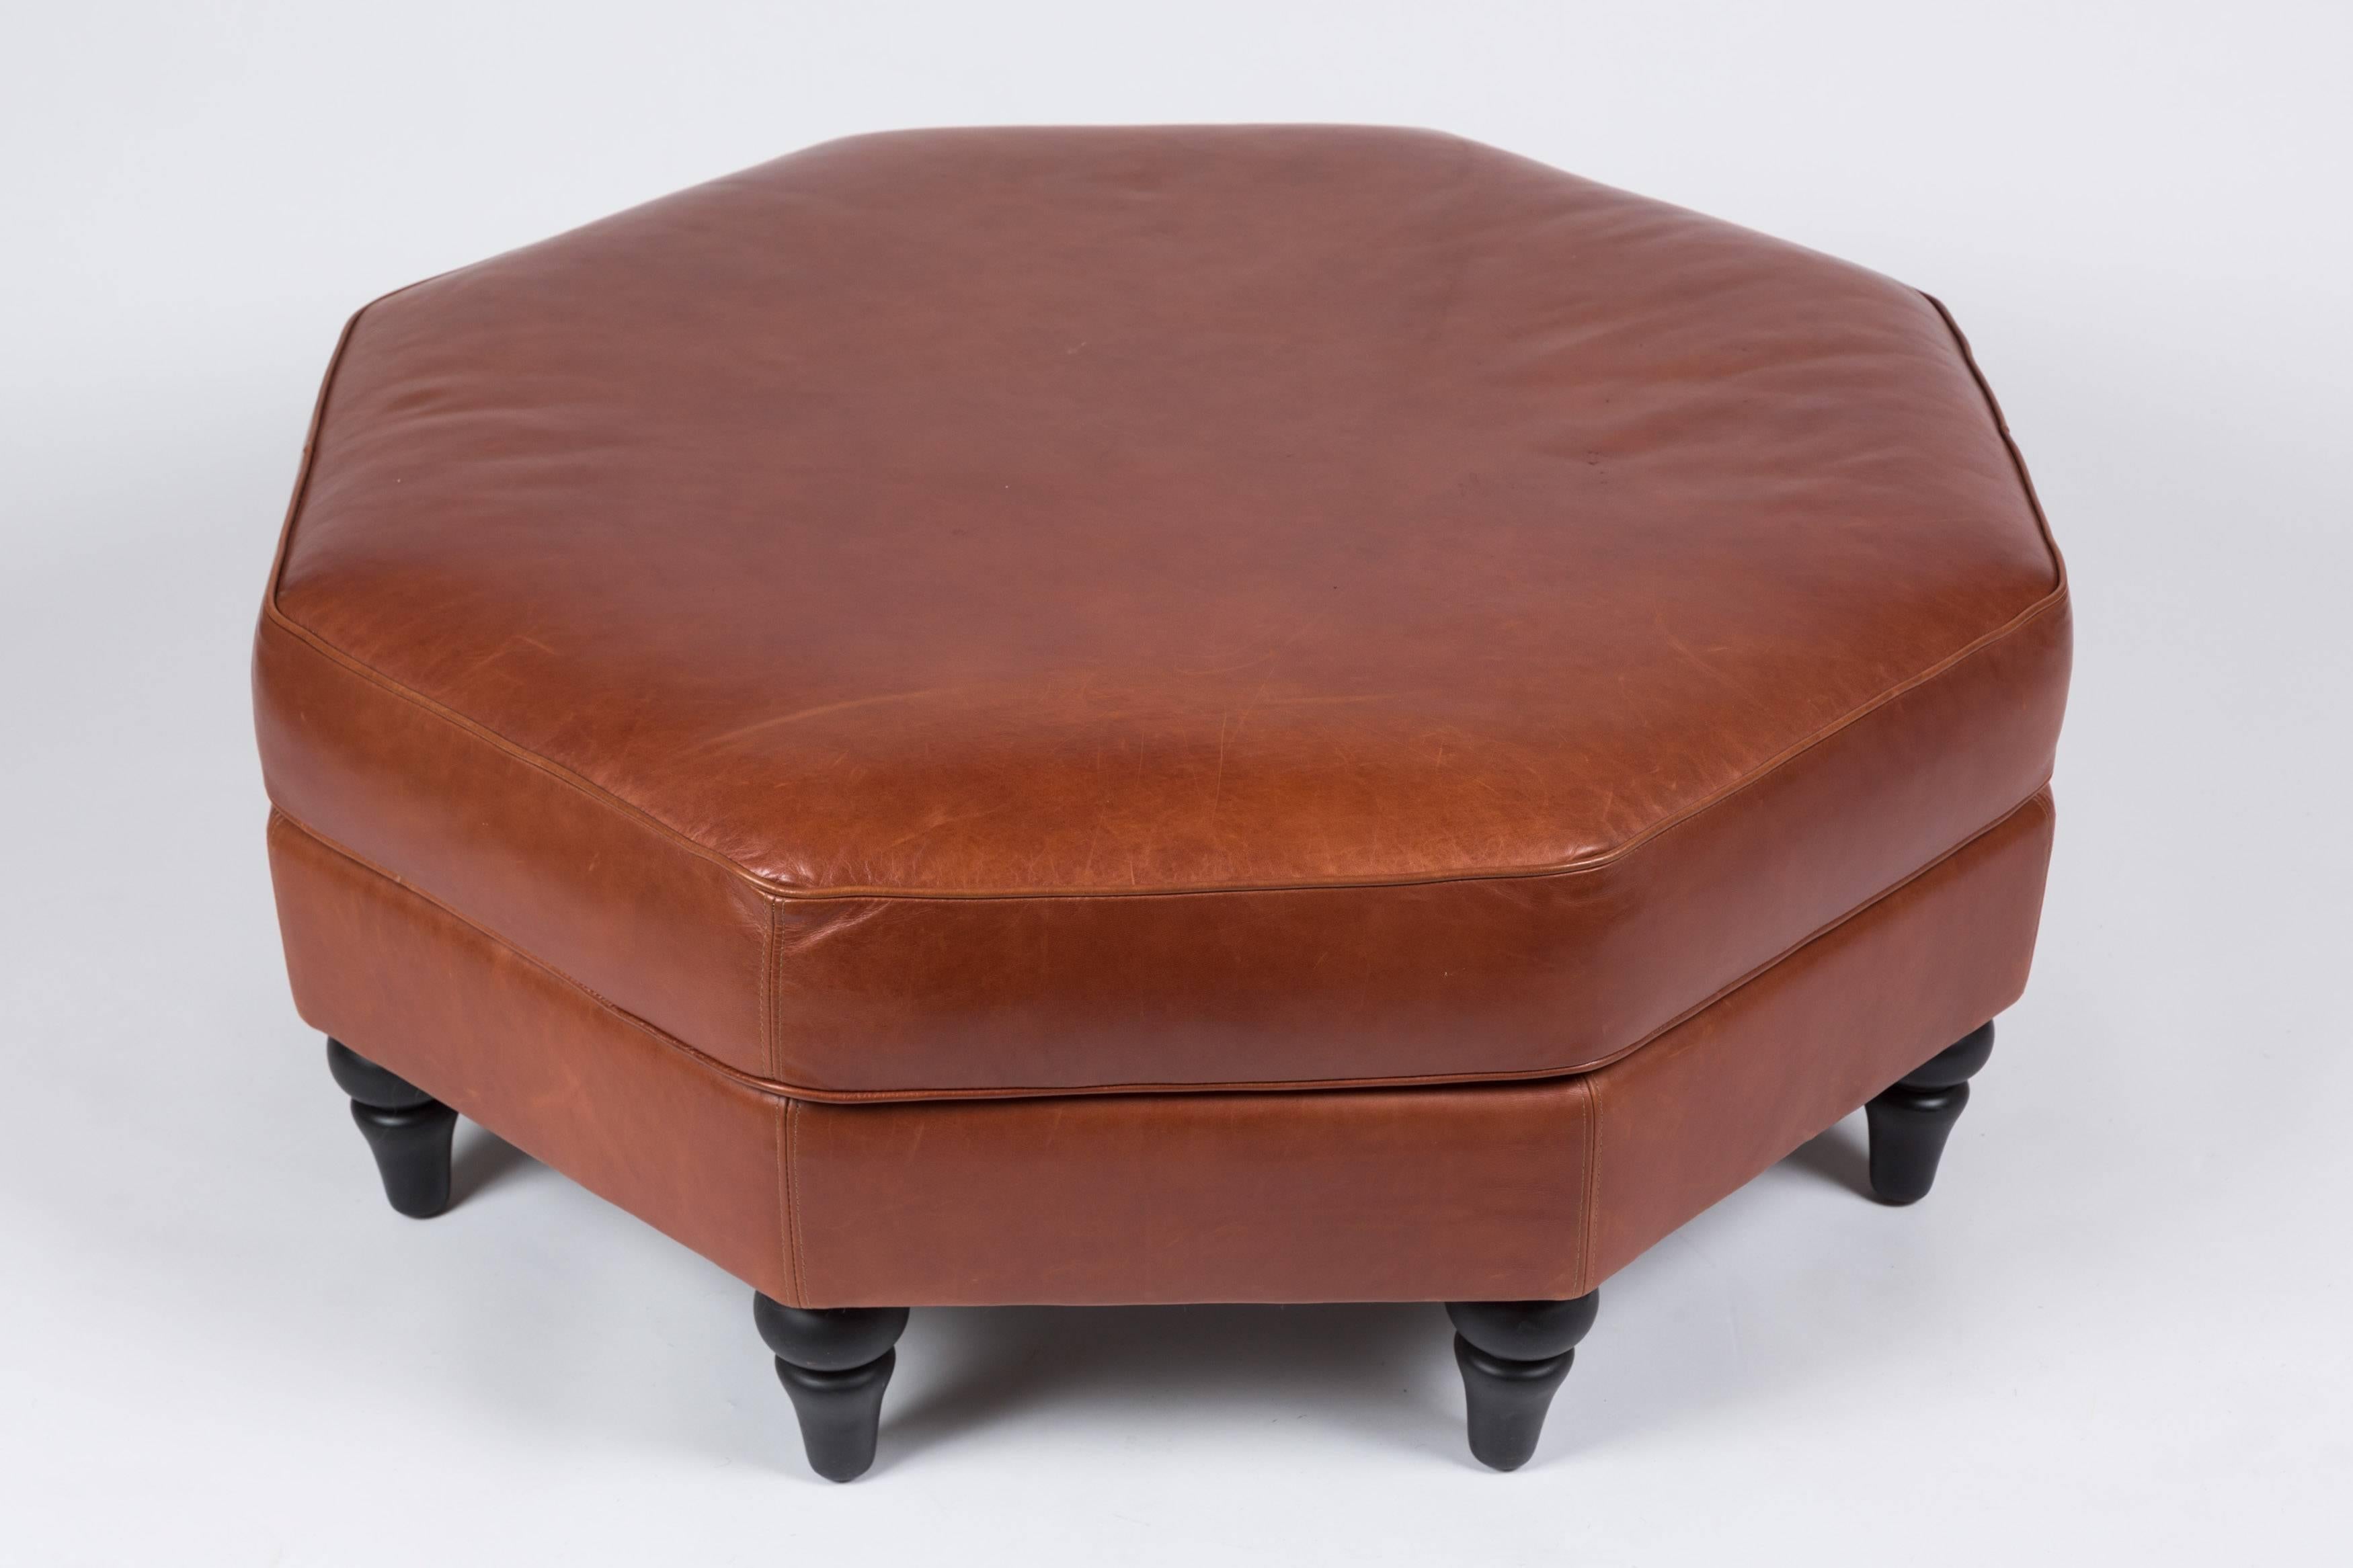 American Large Octagonal Cognac Leather Ottoman For Sale